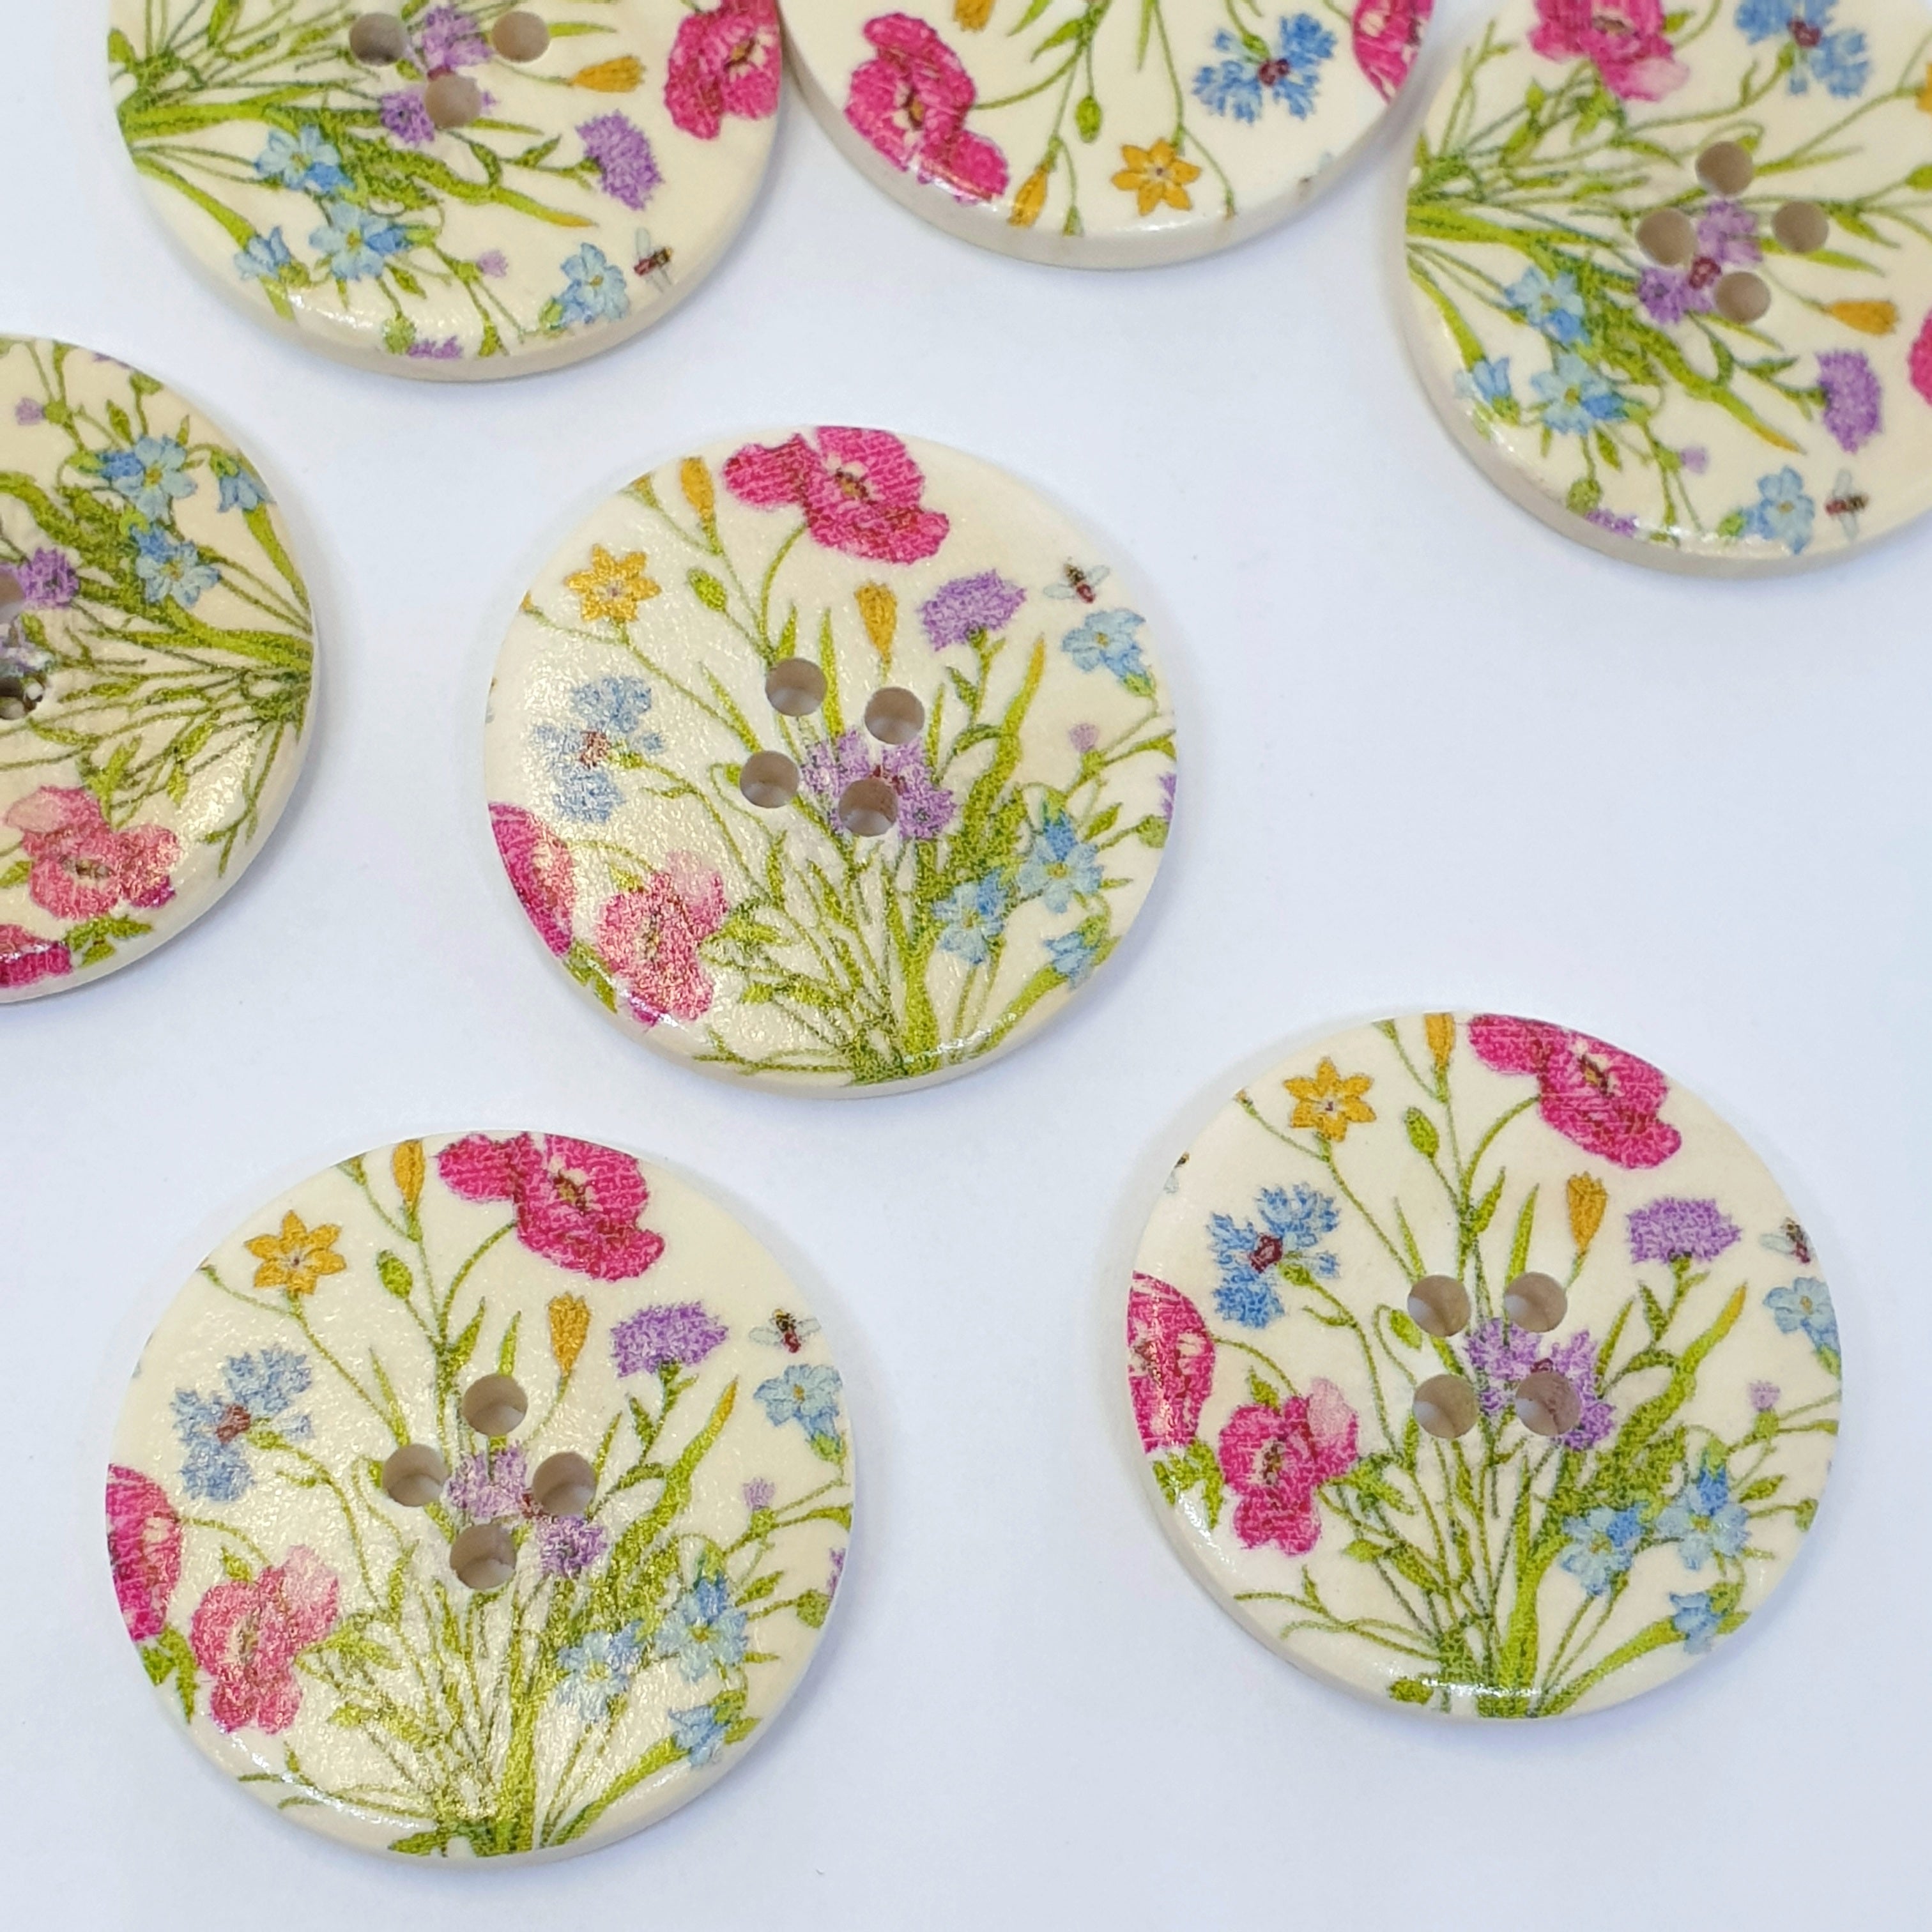 MajorCrafts 16pcs 30mm Pink Yellow Blue Purple Flower Pattern 4 Holes Round Large Wooden Sewing Buttons